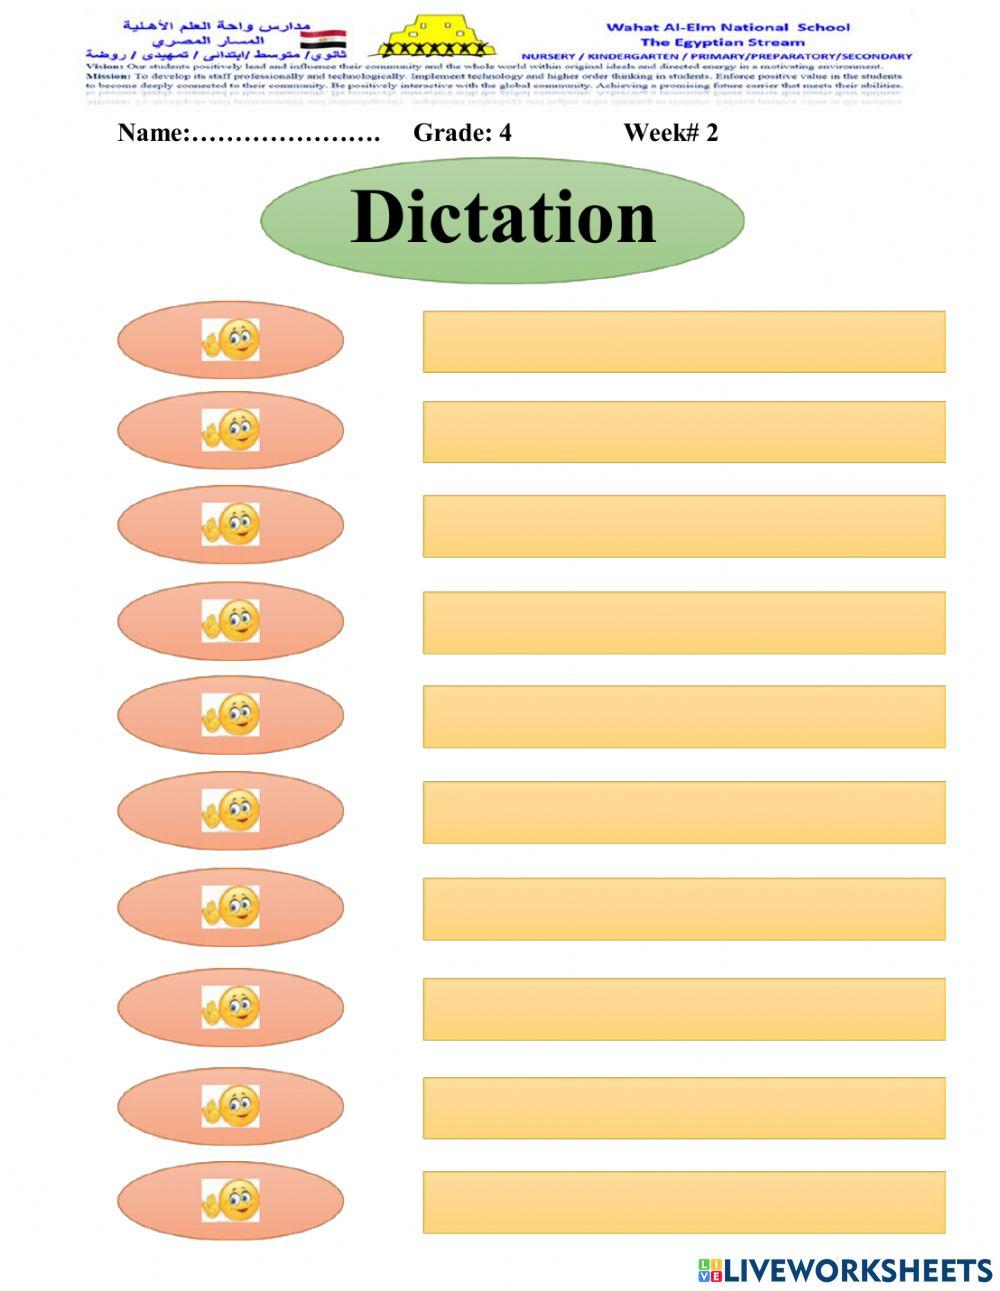 Dictation Time for English week 2